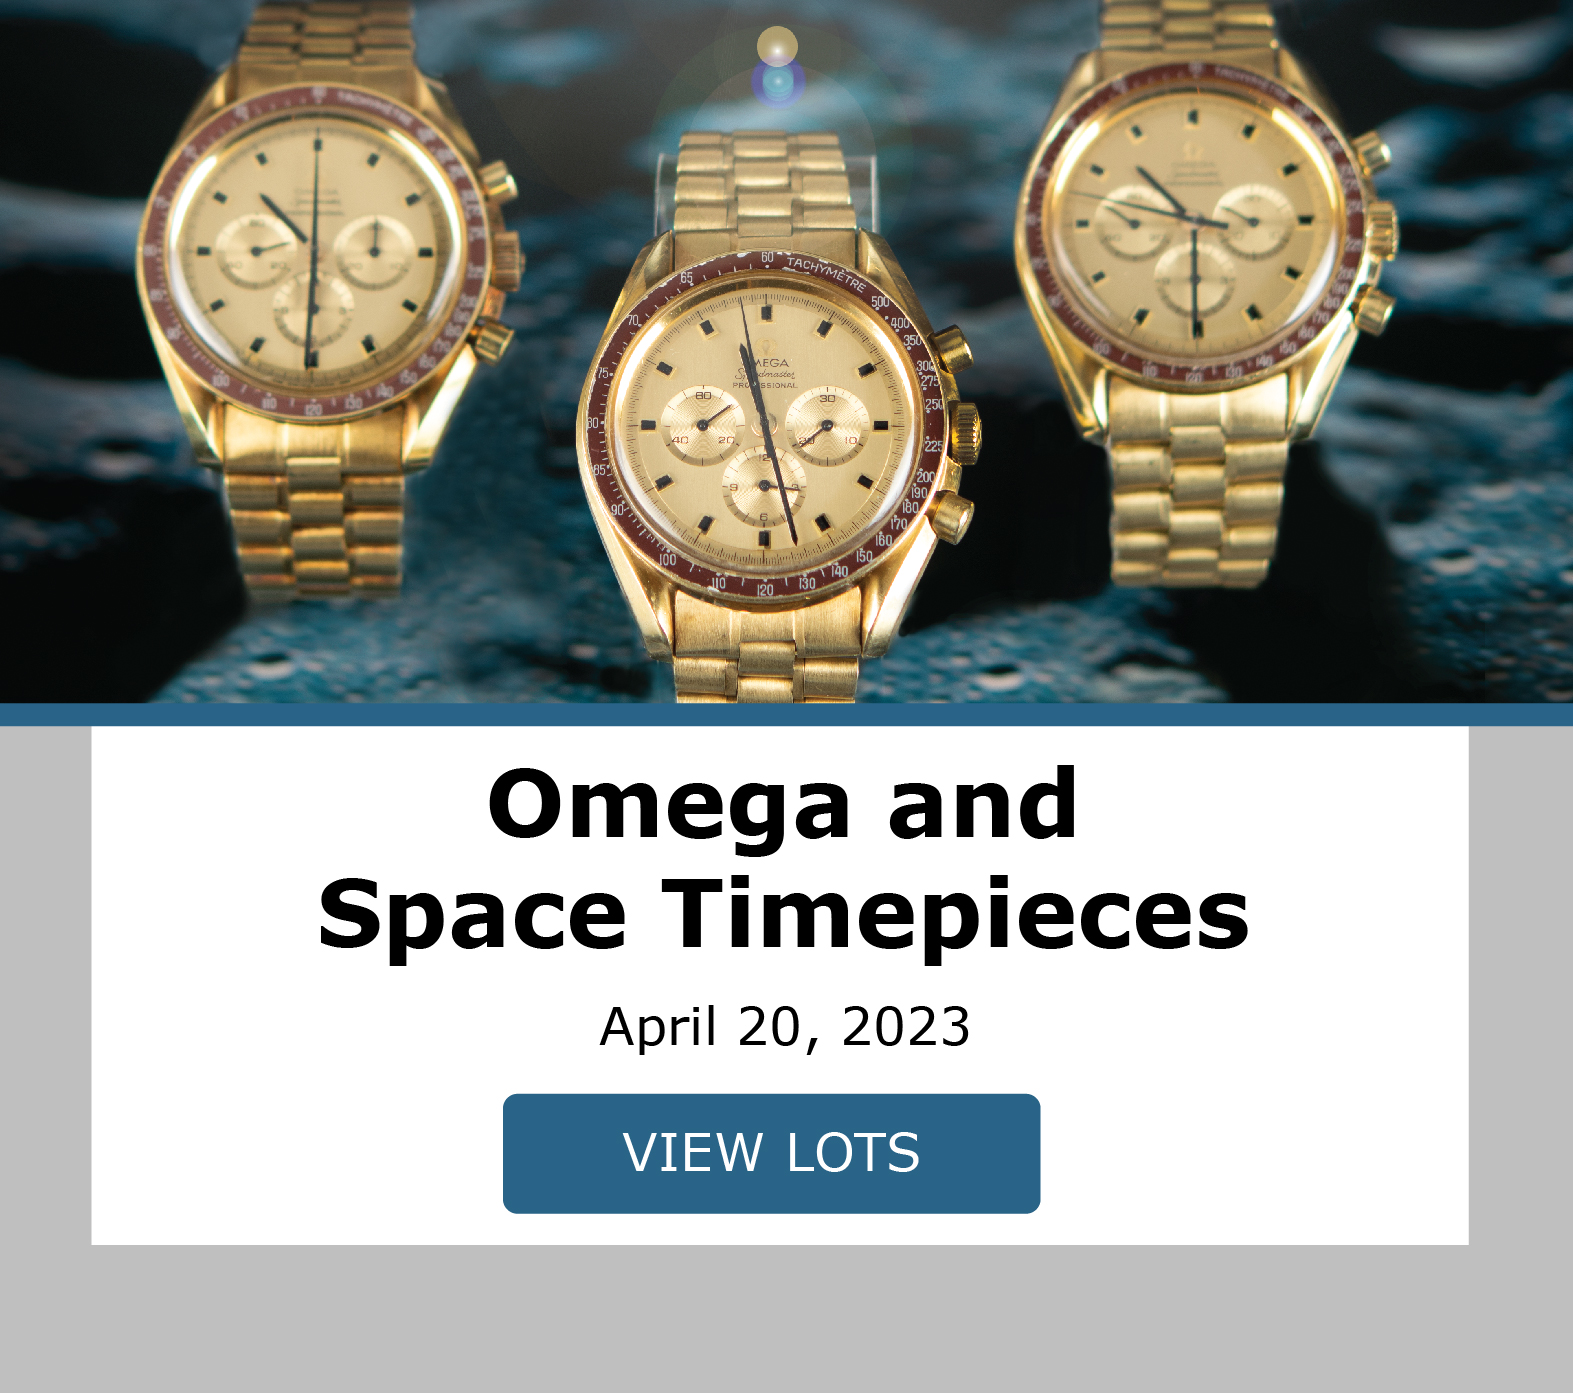 Omega and Space Timepieces. Bidding closes April 20th!